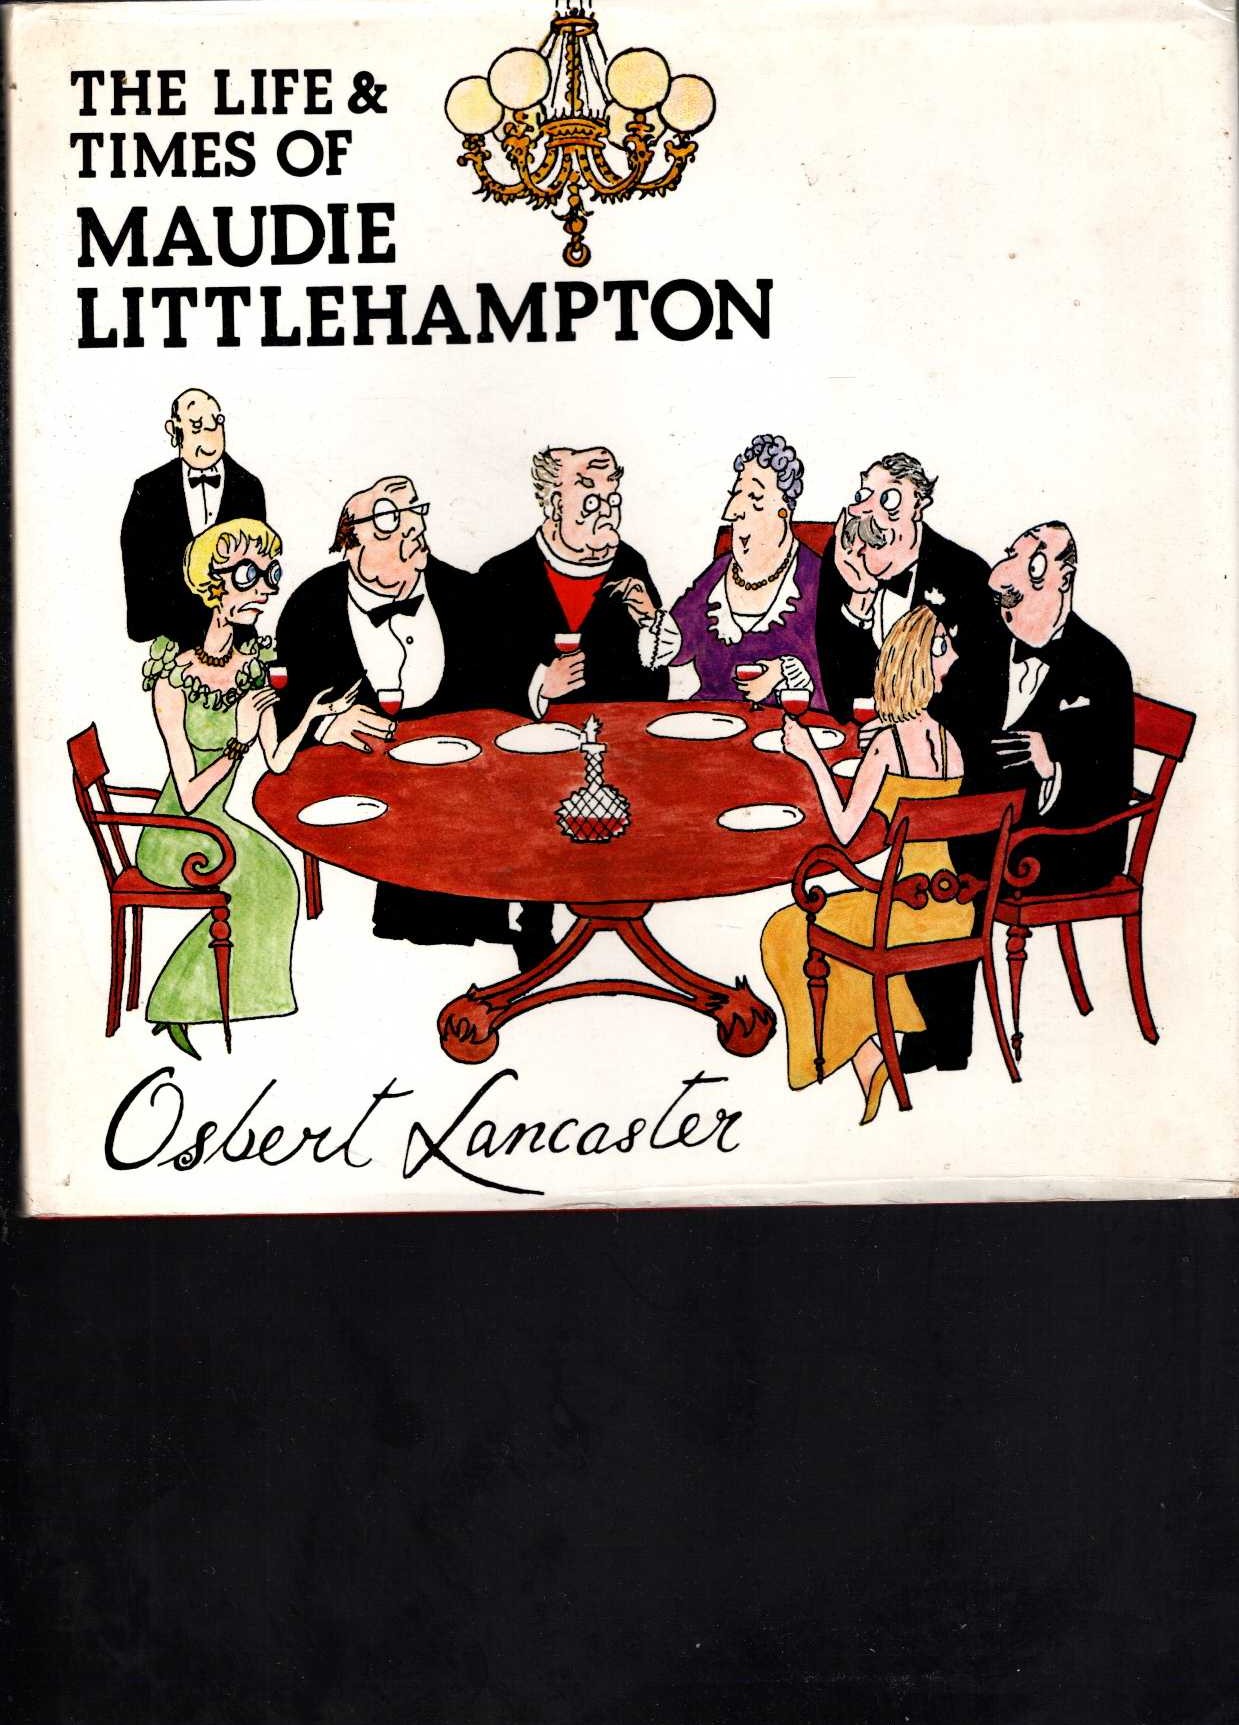 THE LIFE & TIMES OF MAUDIE LITTLEHAMPTON front book cover image